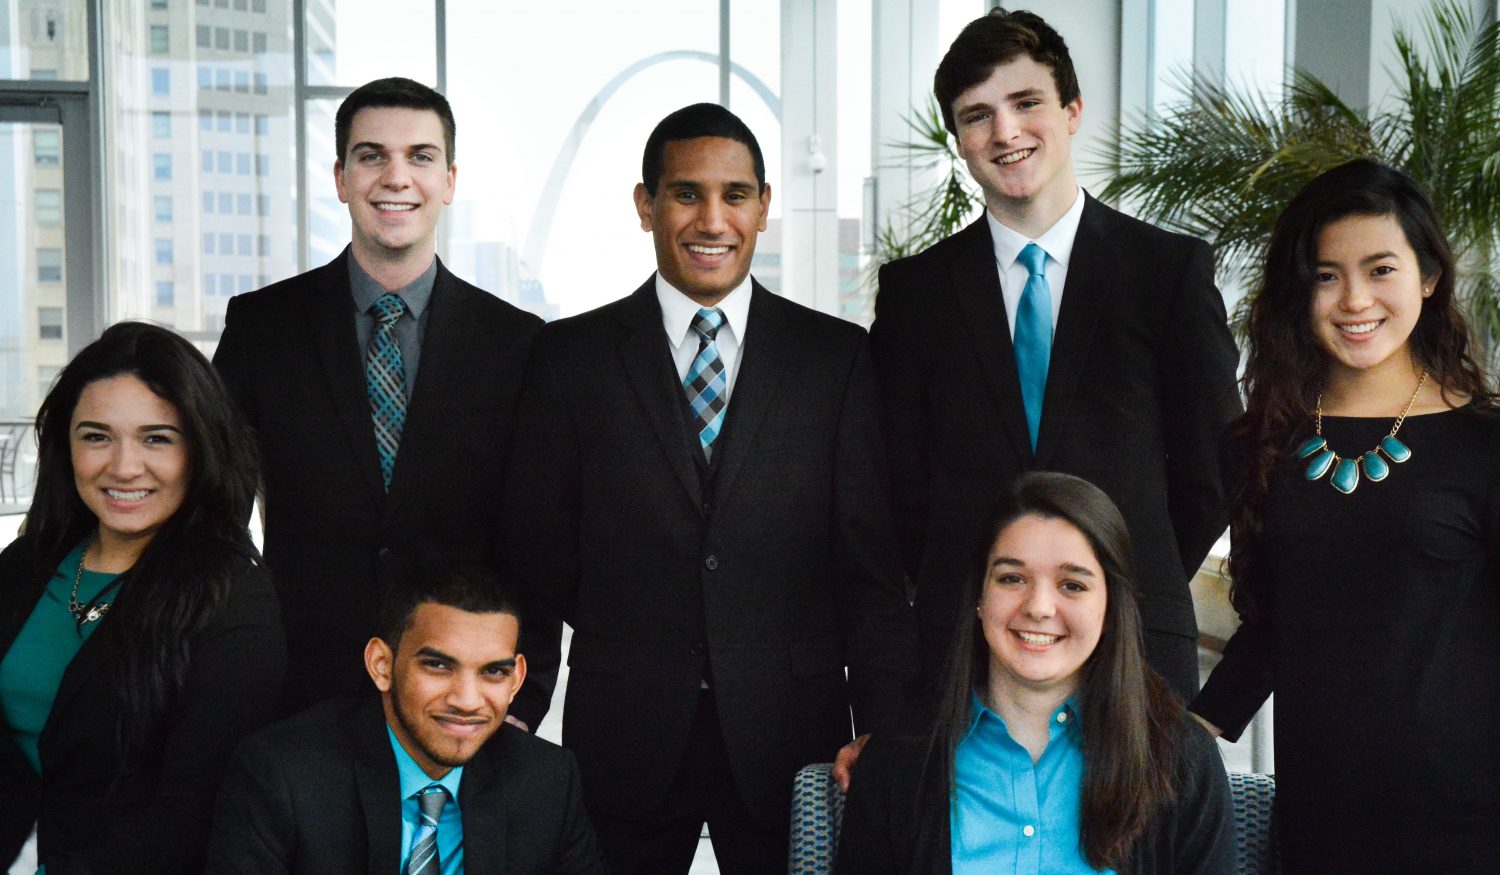 SGA: The Executive Board is ready to lead the student body for 2014-2015.
Luke Yamnitz Photography